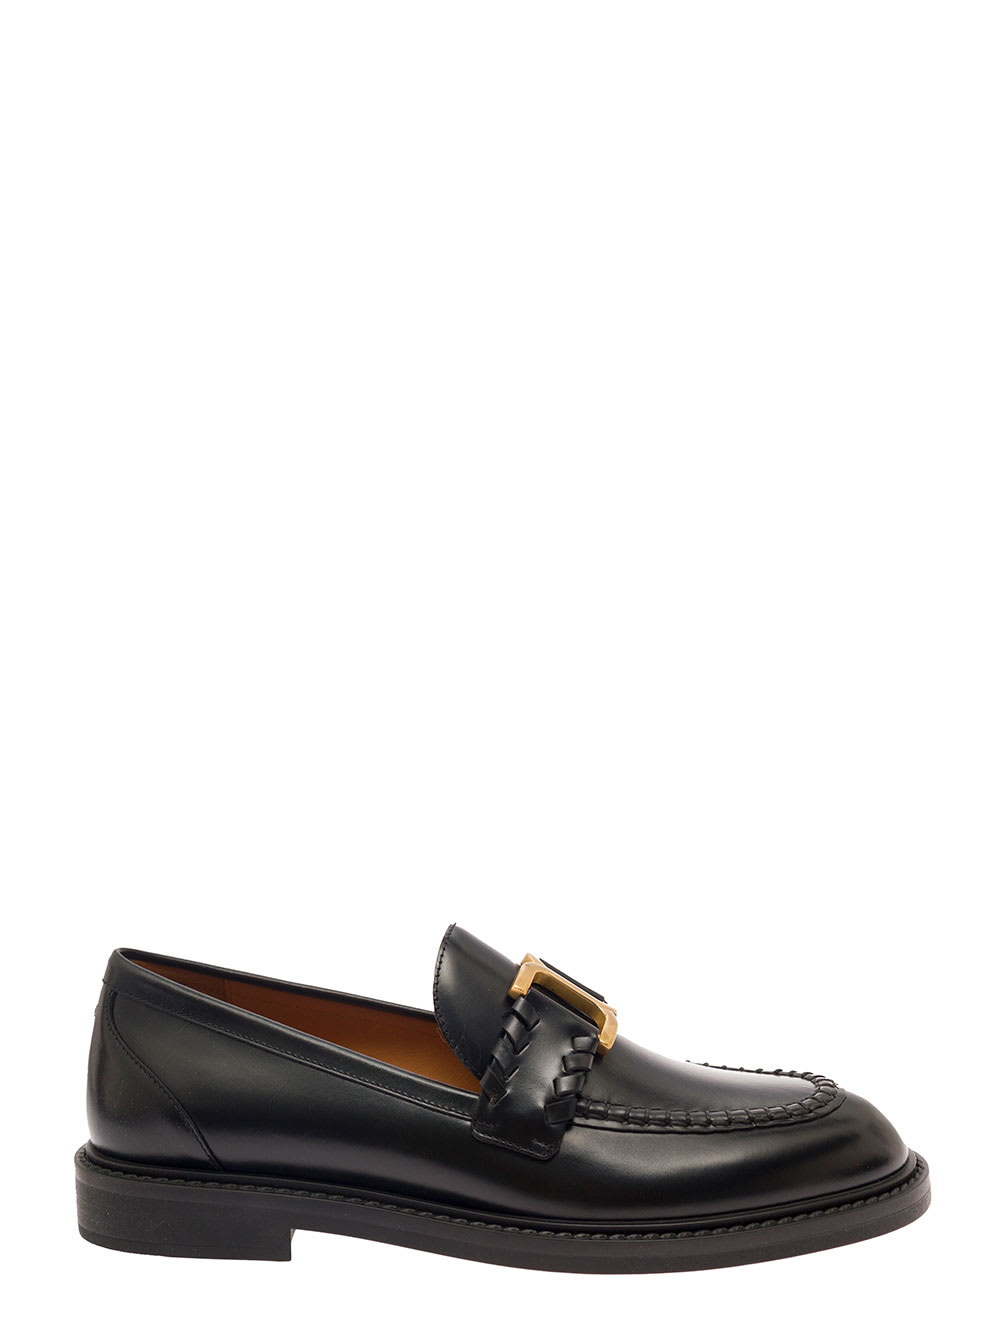 CHLOÉ MARCIE BLACK LOAFERS WITH GOLD-COLORED METAL LOGO IN SMOOTH LEATHER WOMAN